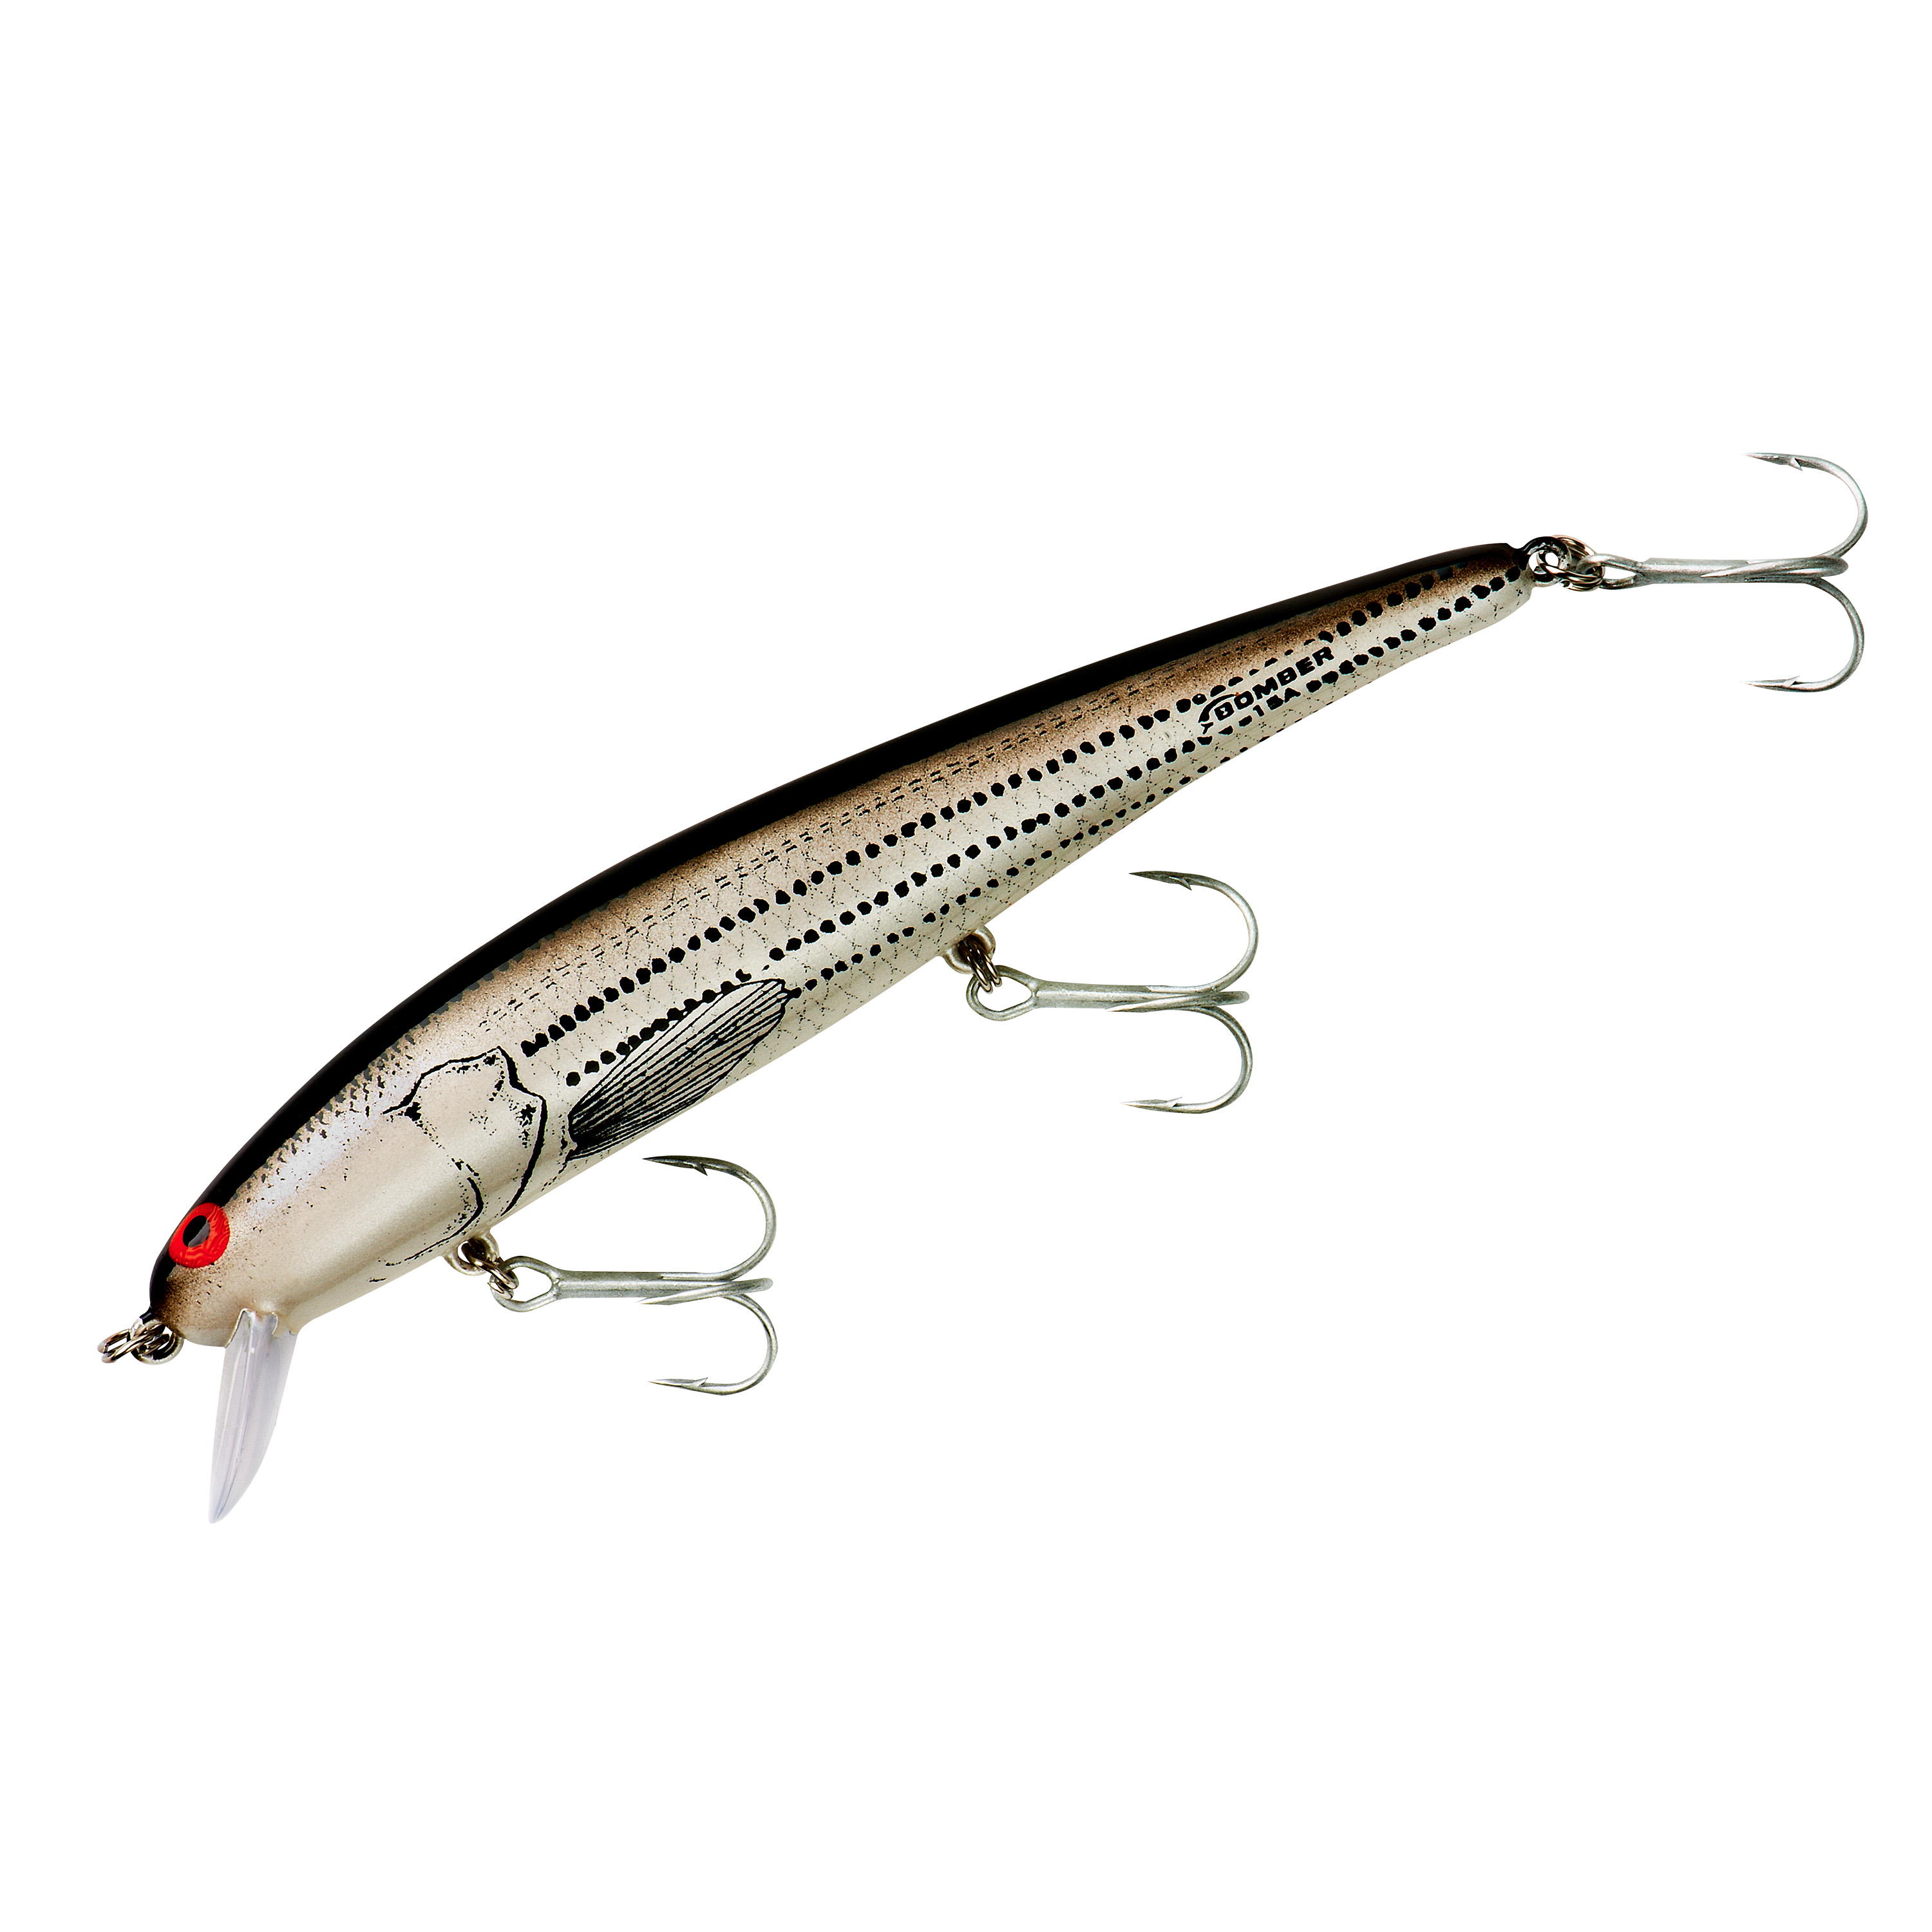 Bomber Long A Fishing Lure : : Sports, Fitness & Outdoors